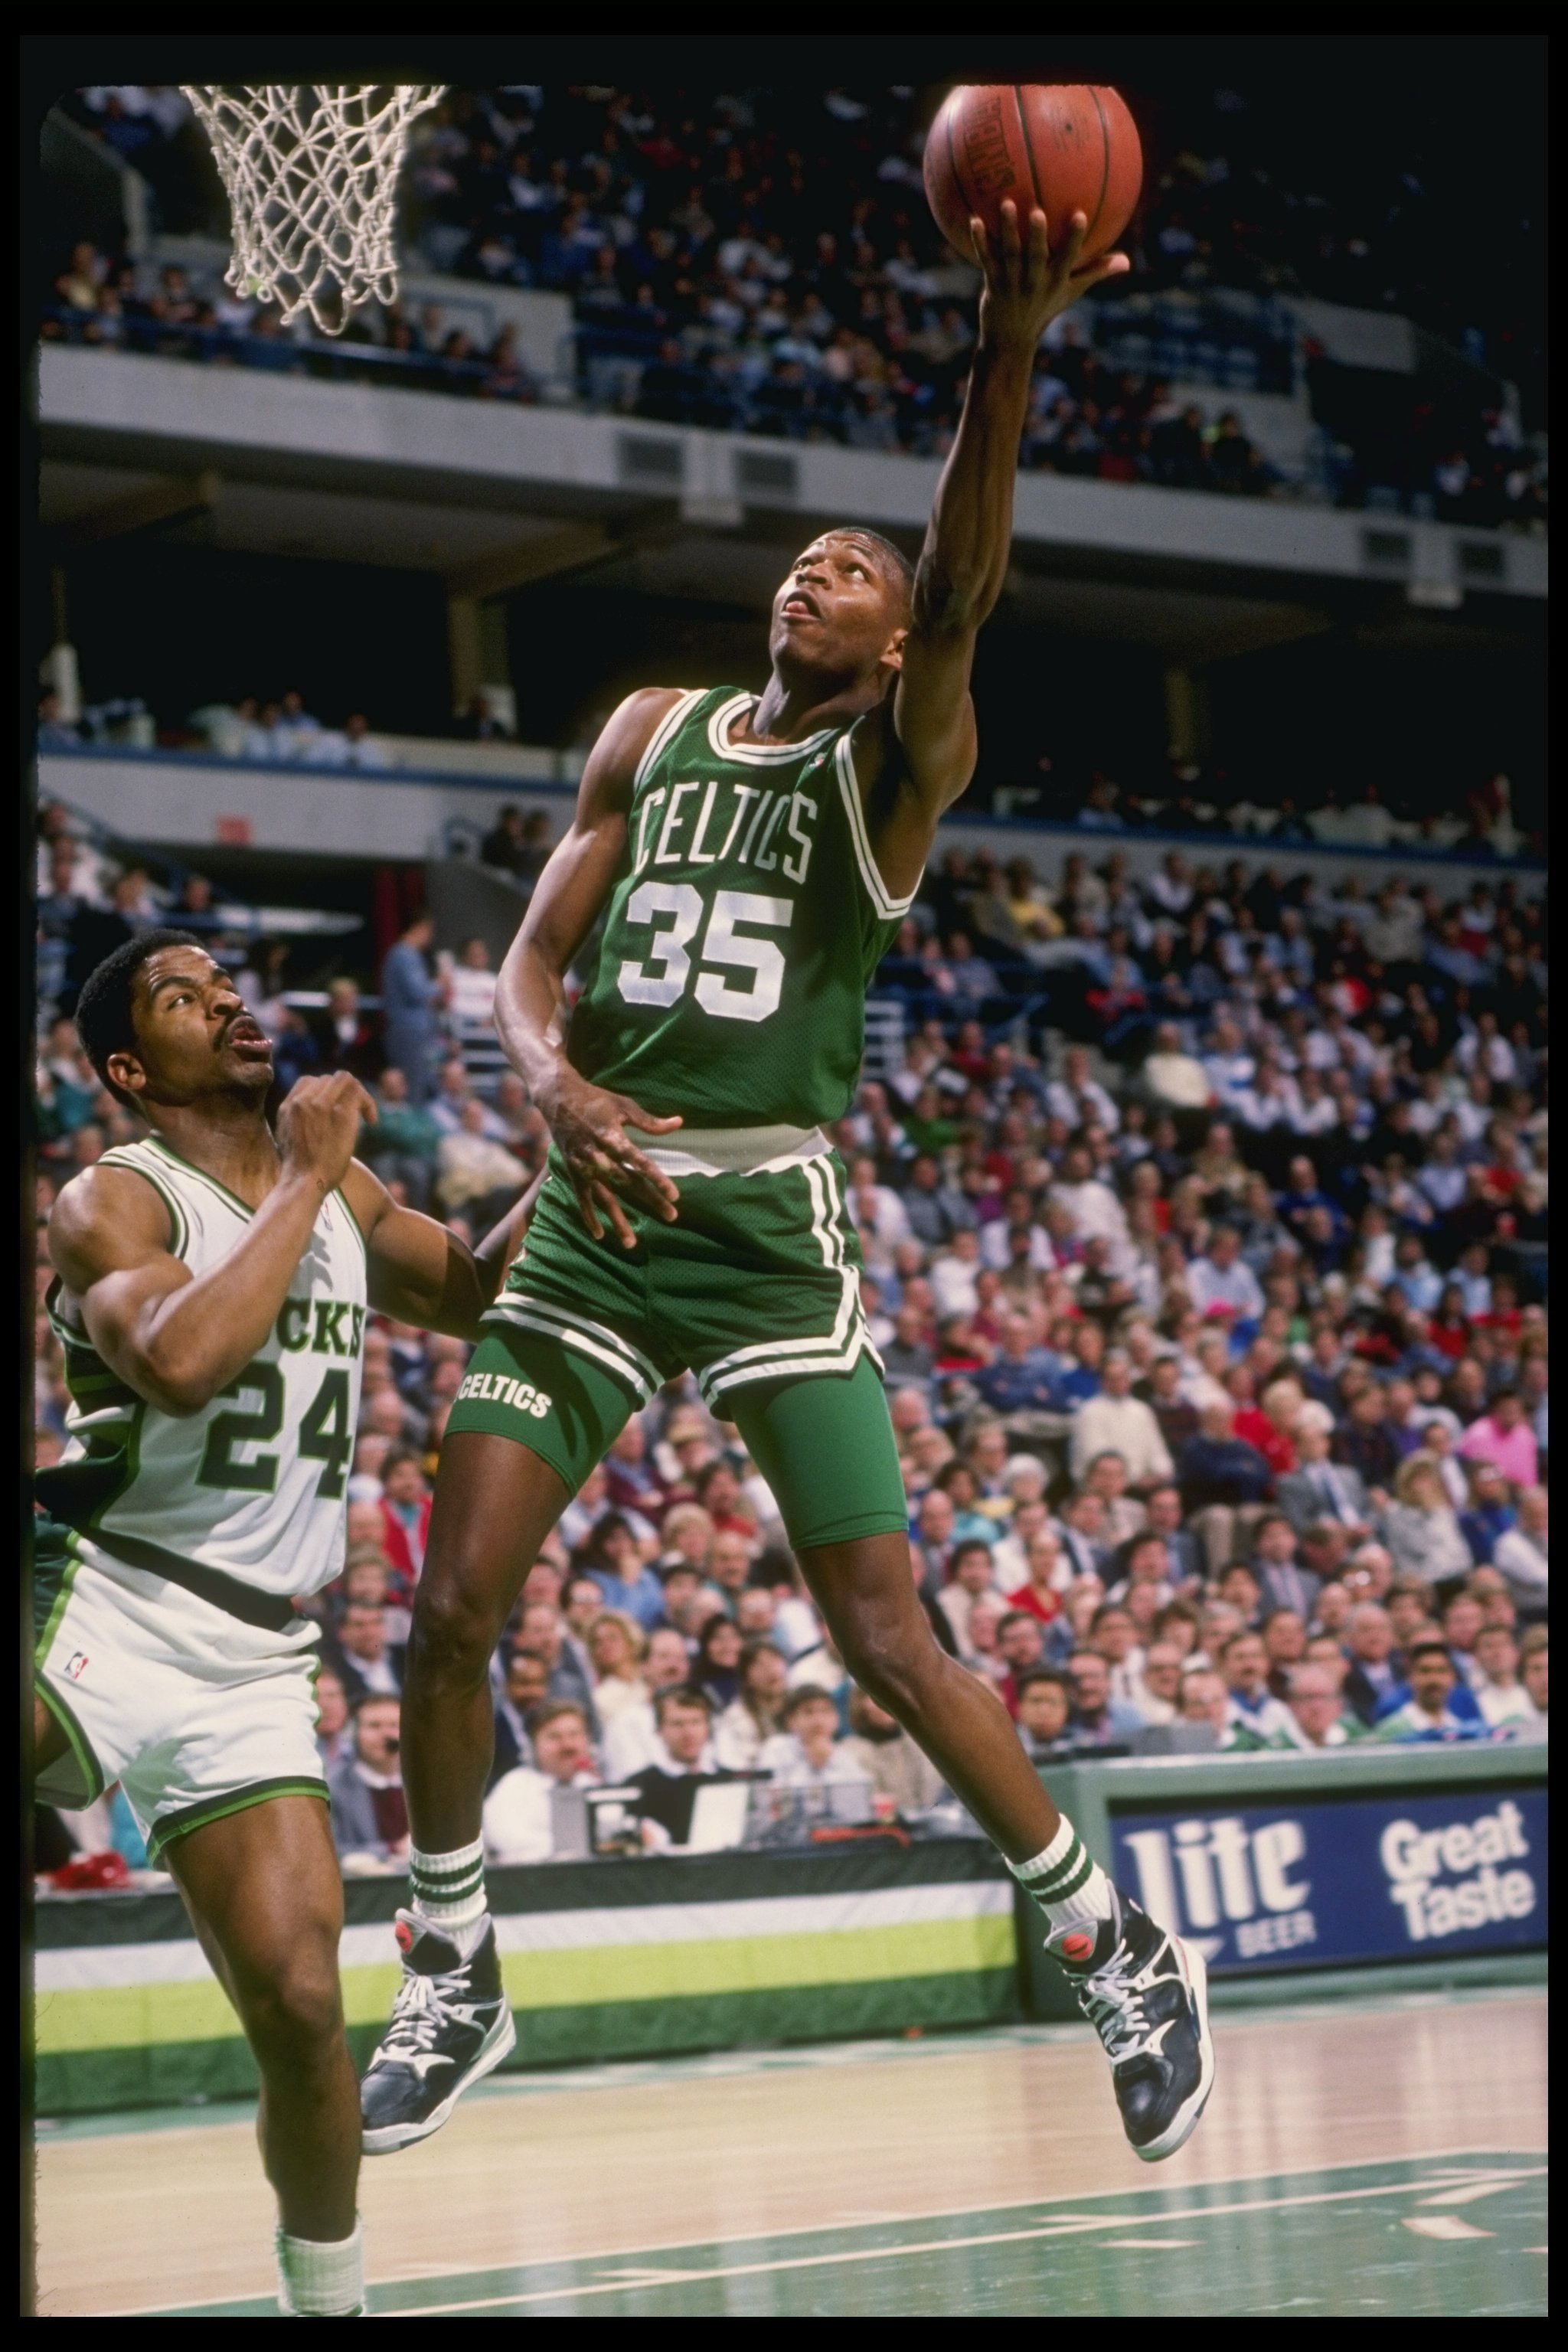 Guard Reggie Lewis of the Boston Celtics lays up the ball during a game against the Milwaukee Bucks at the Bradley Center in Milwaukee, Wisconsin.